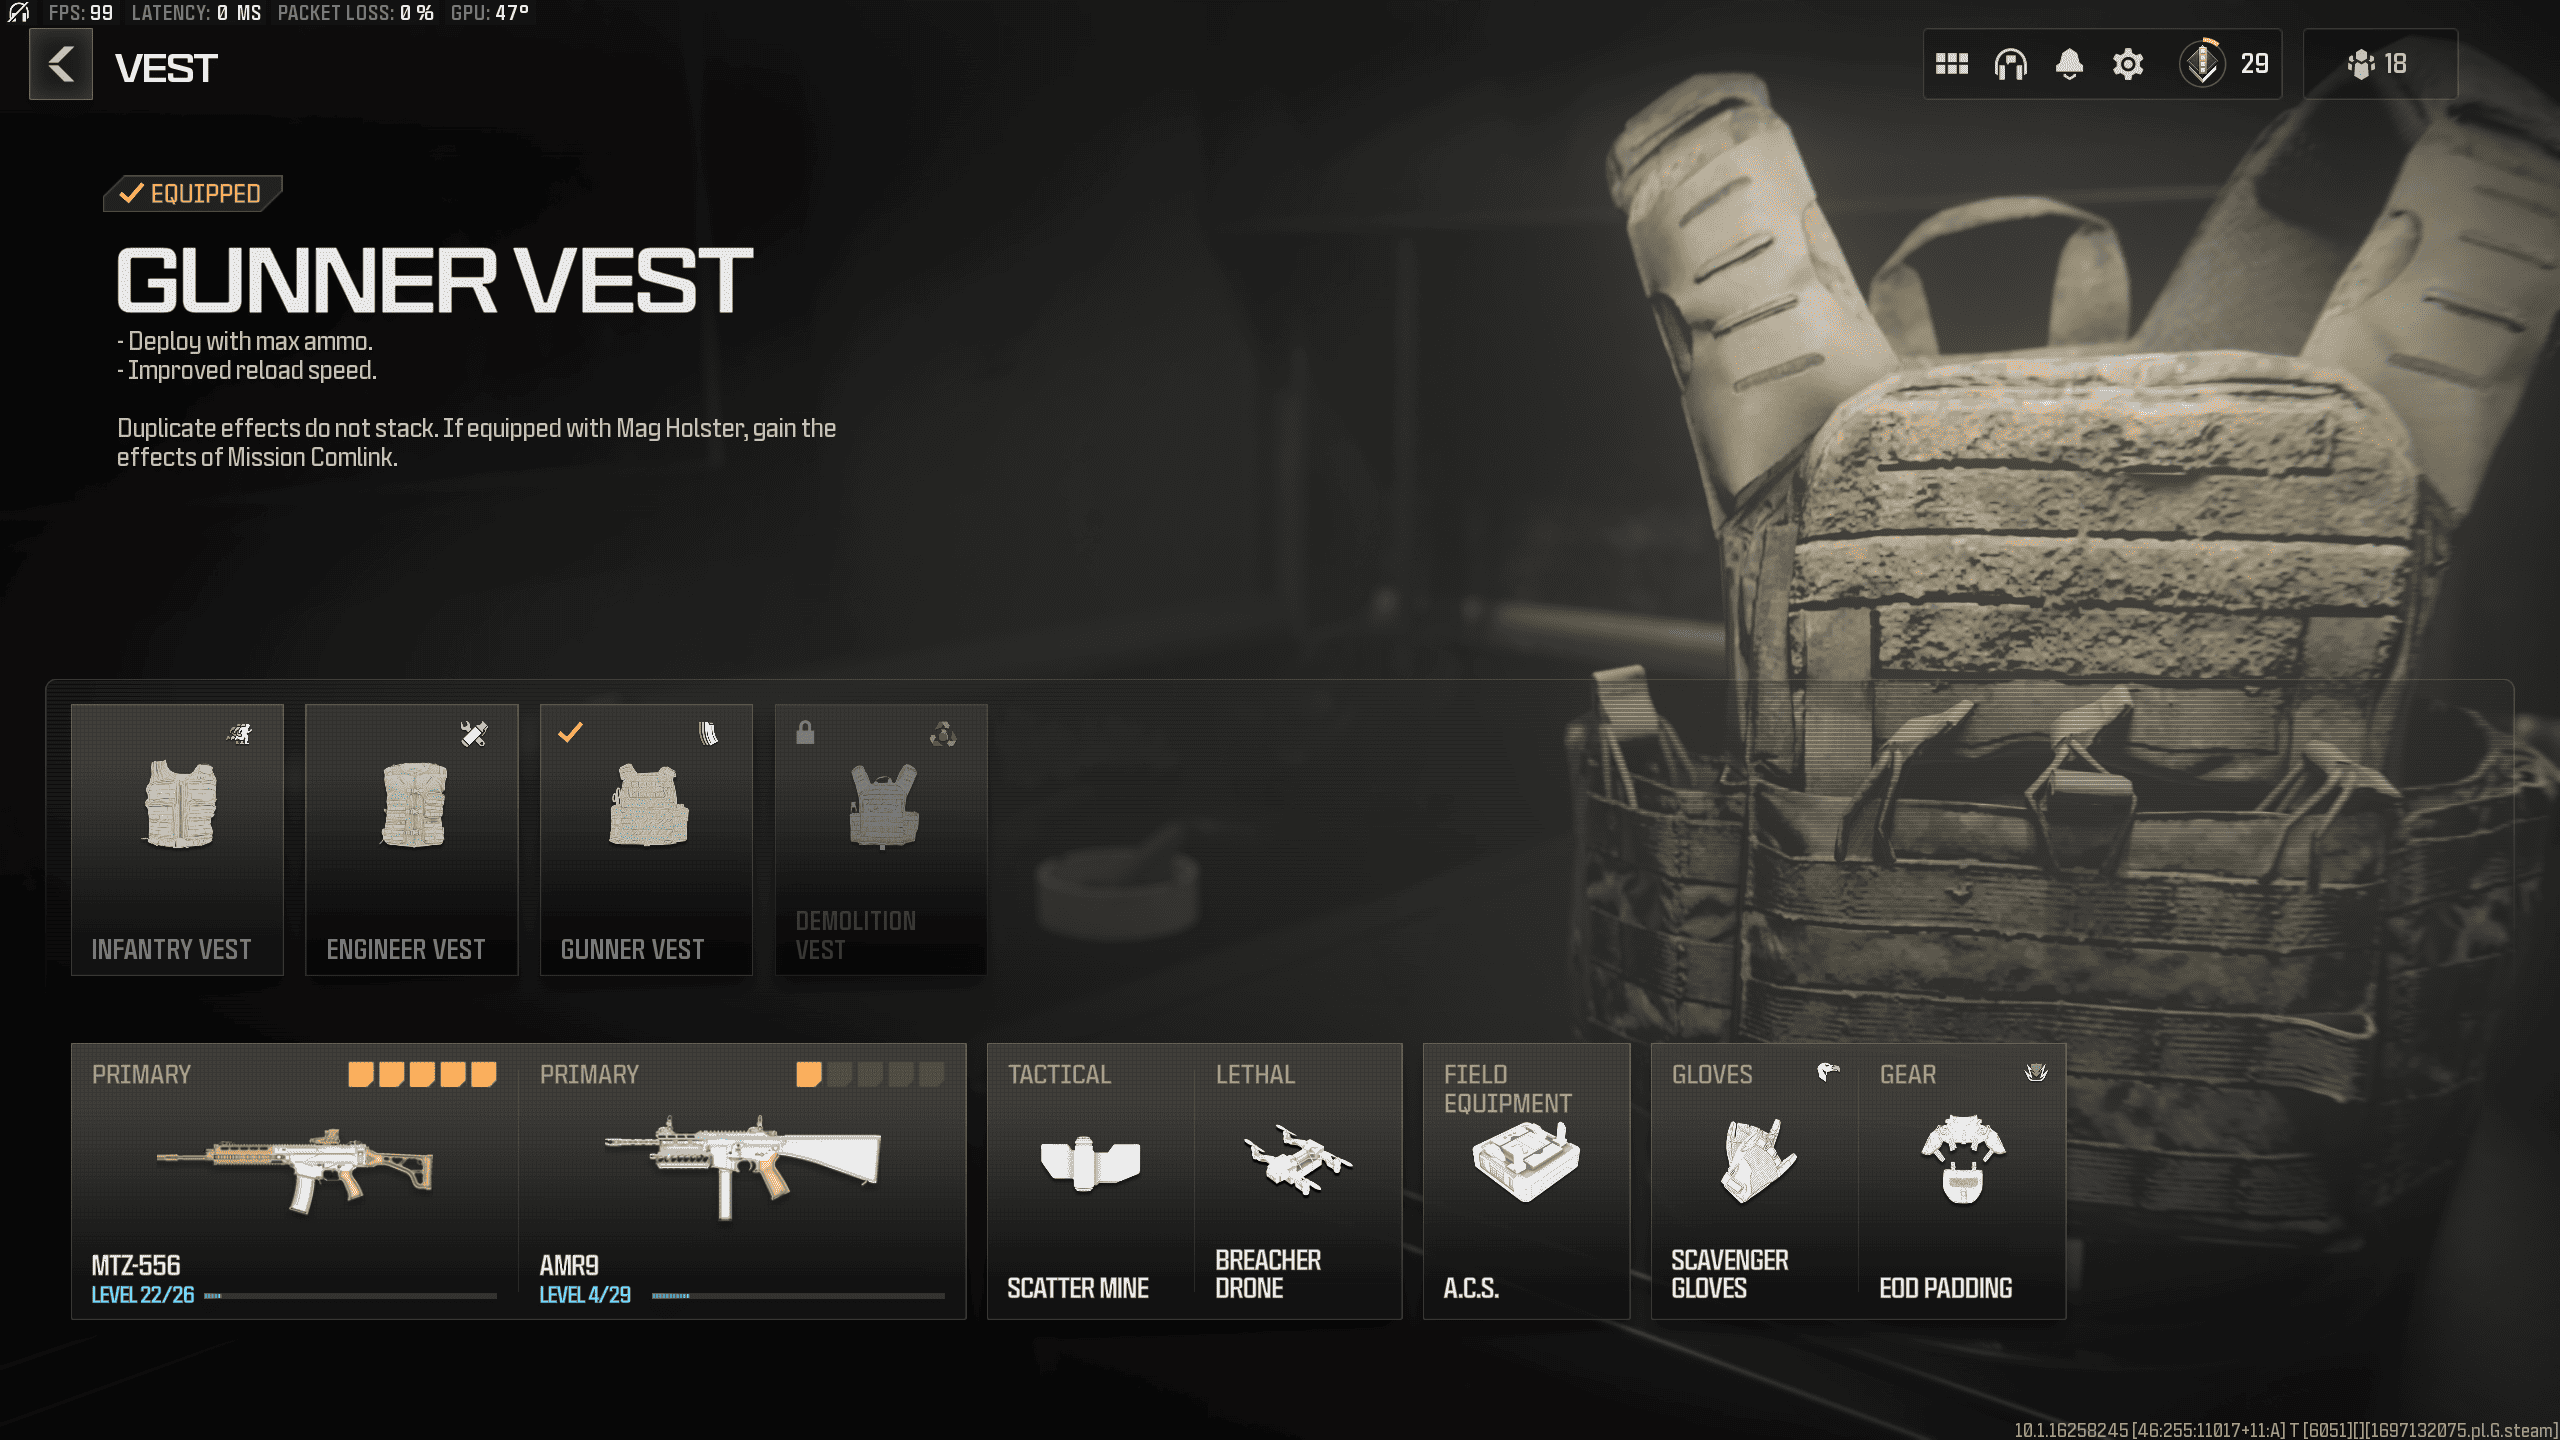 A screenshot showcasing the gunner vest in Call of Duty with some of the best perks in MW3.